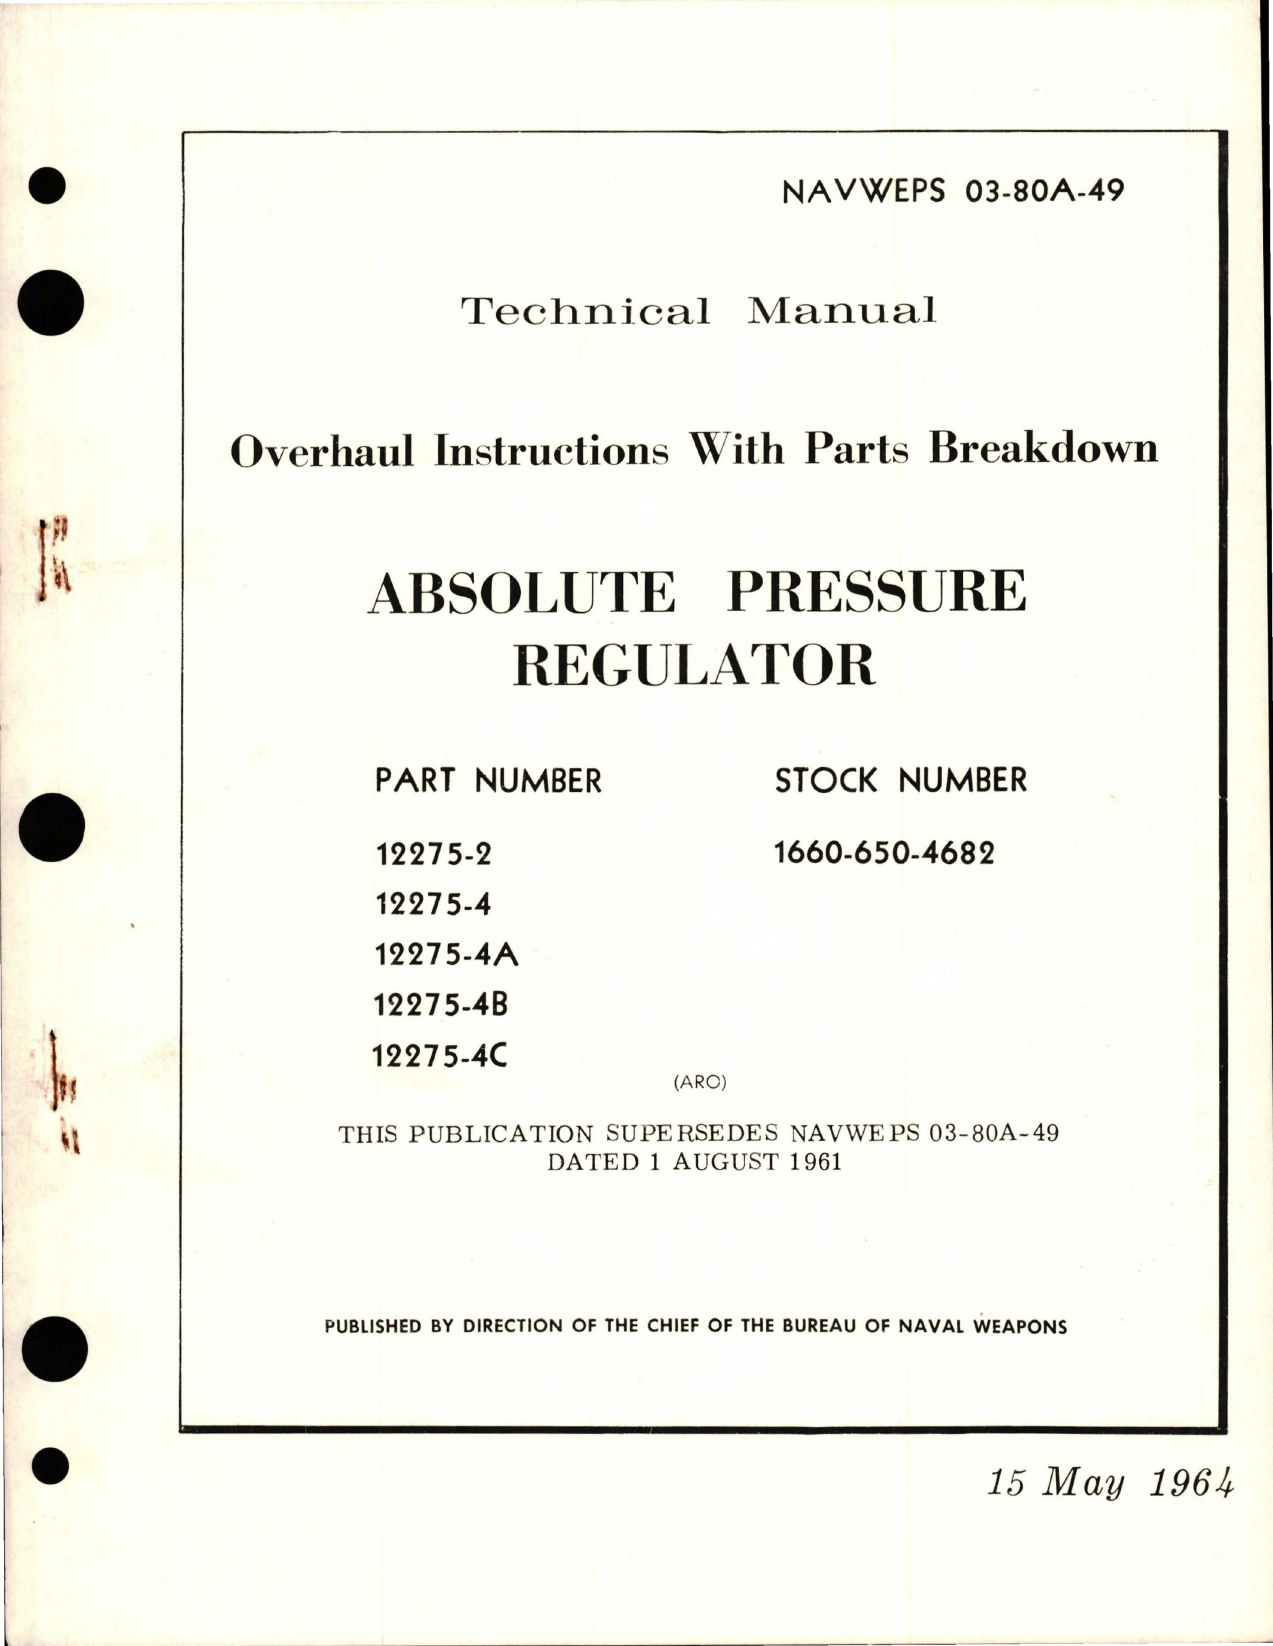 Sample page 1 from AirCorps Library document: Overhaul Instructions with Parts Breakdown for Absolute Pressure Regulator